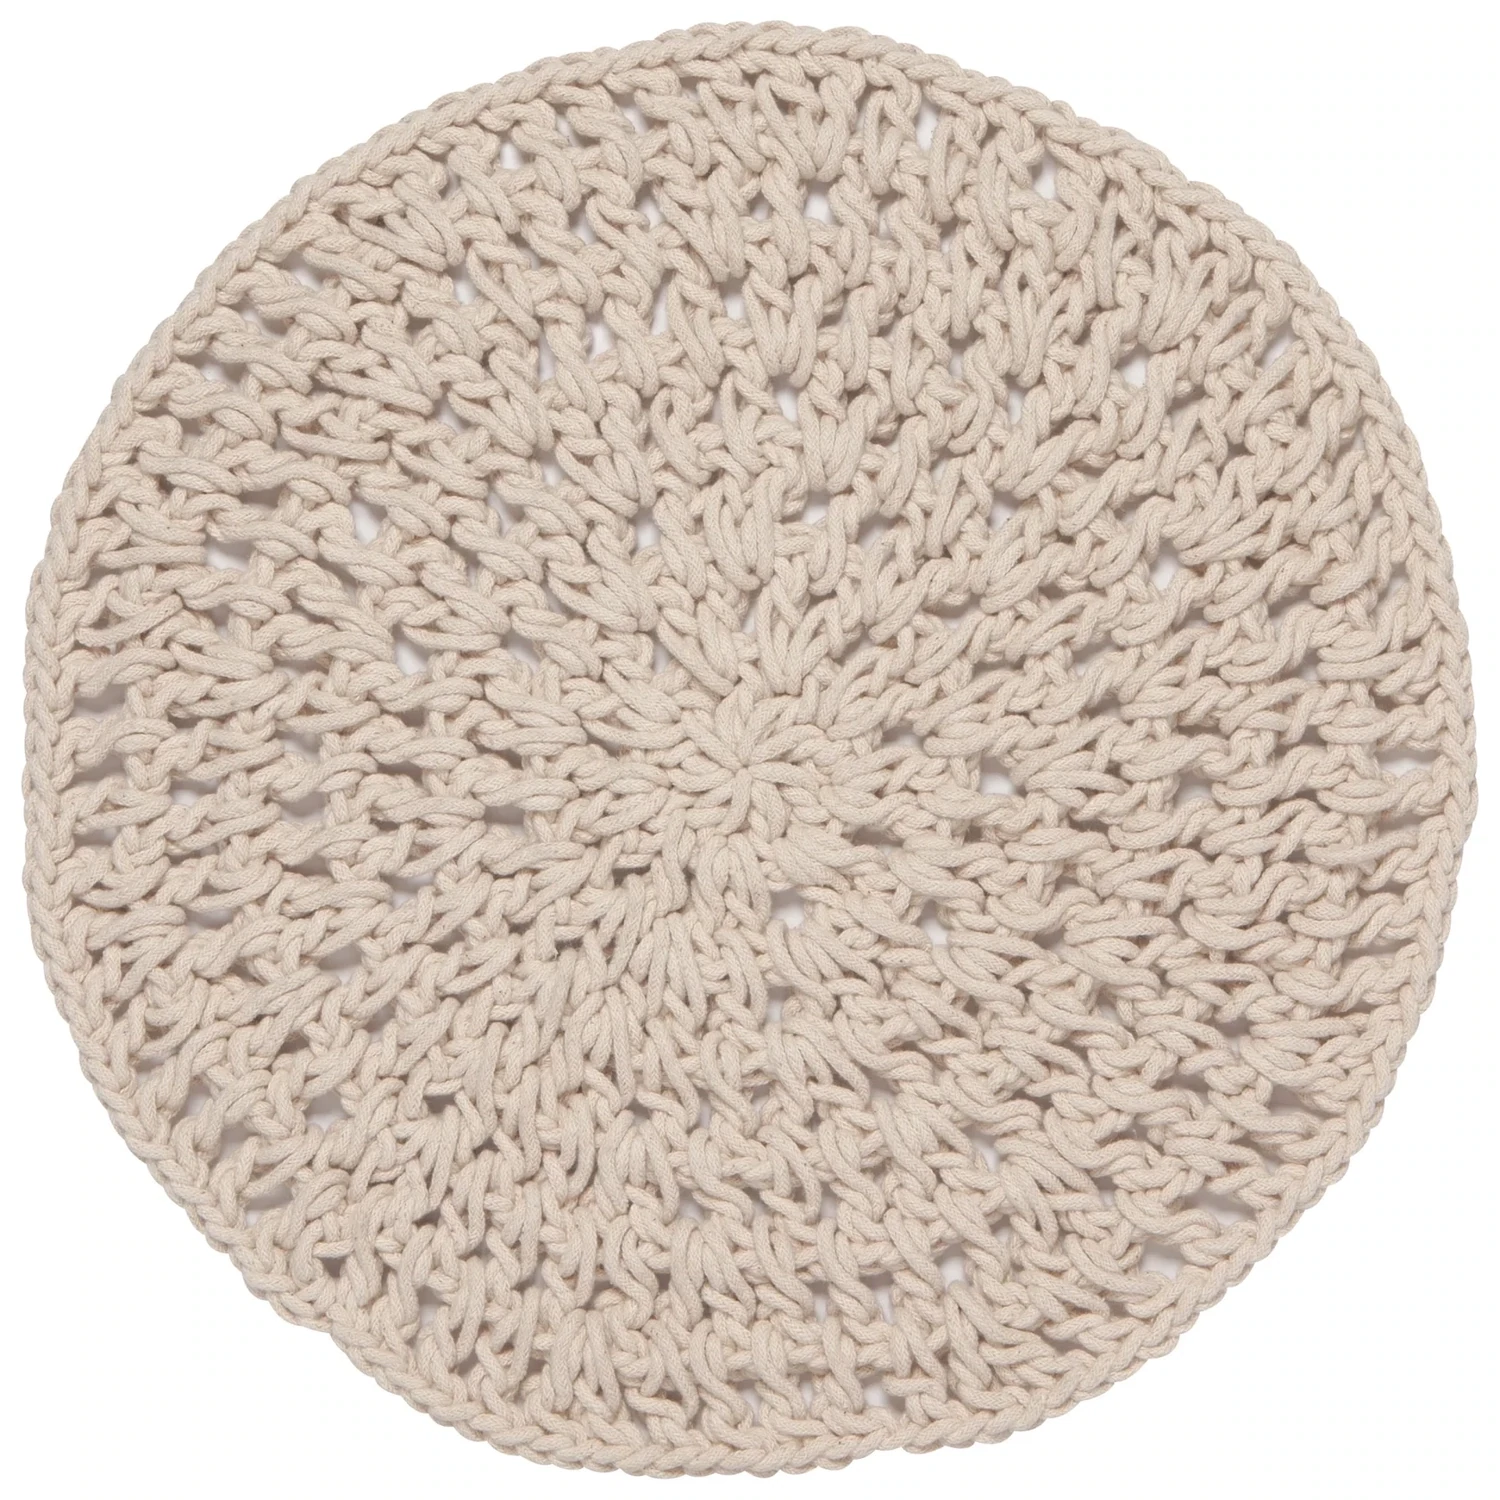 Placemat Knotted Natural